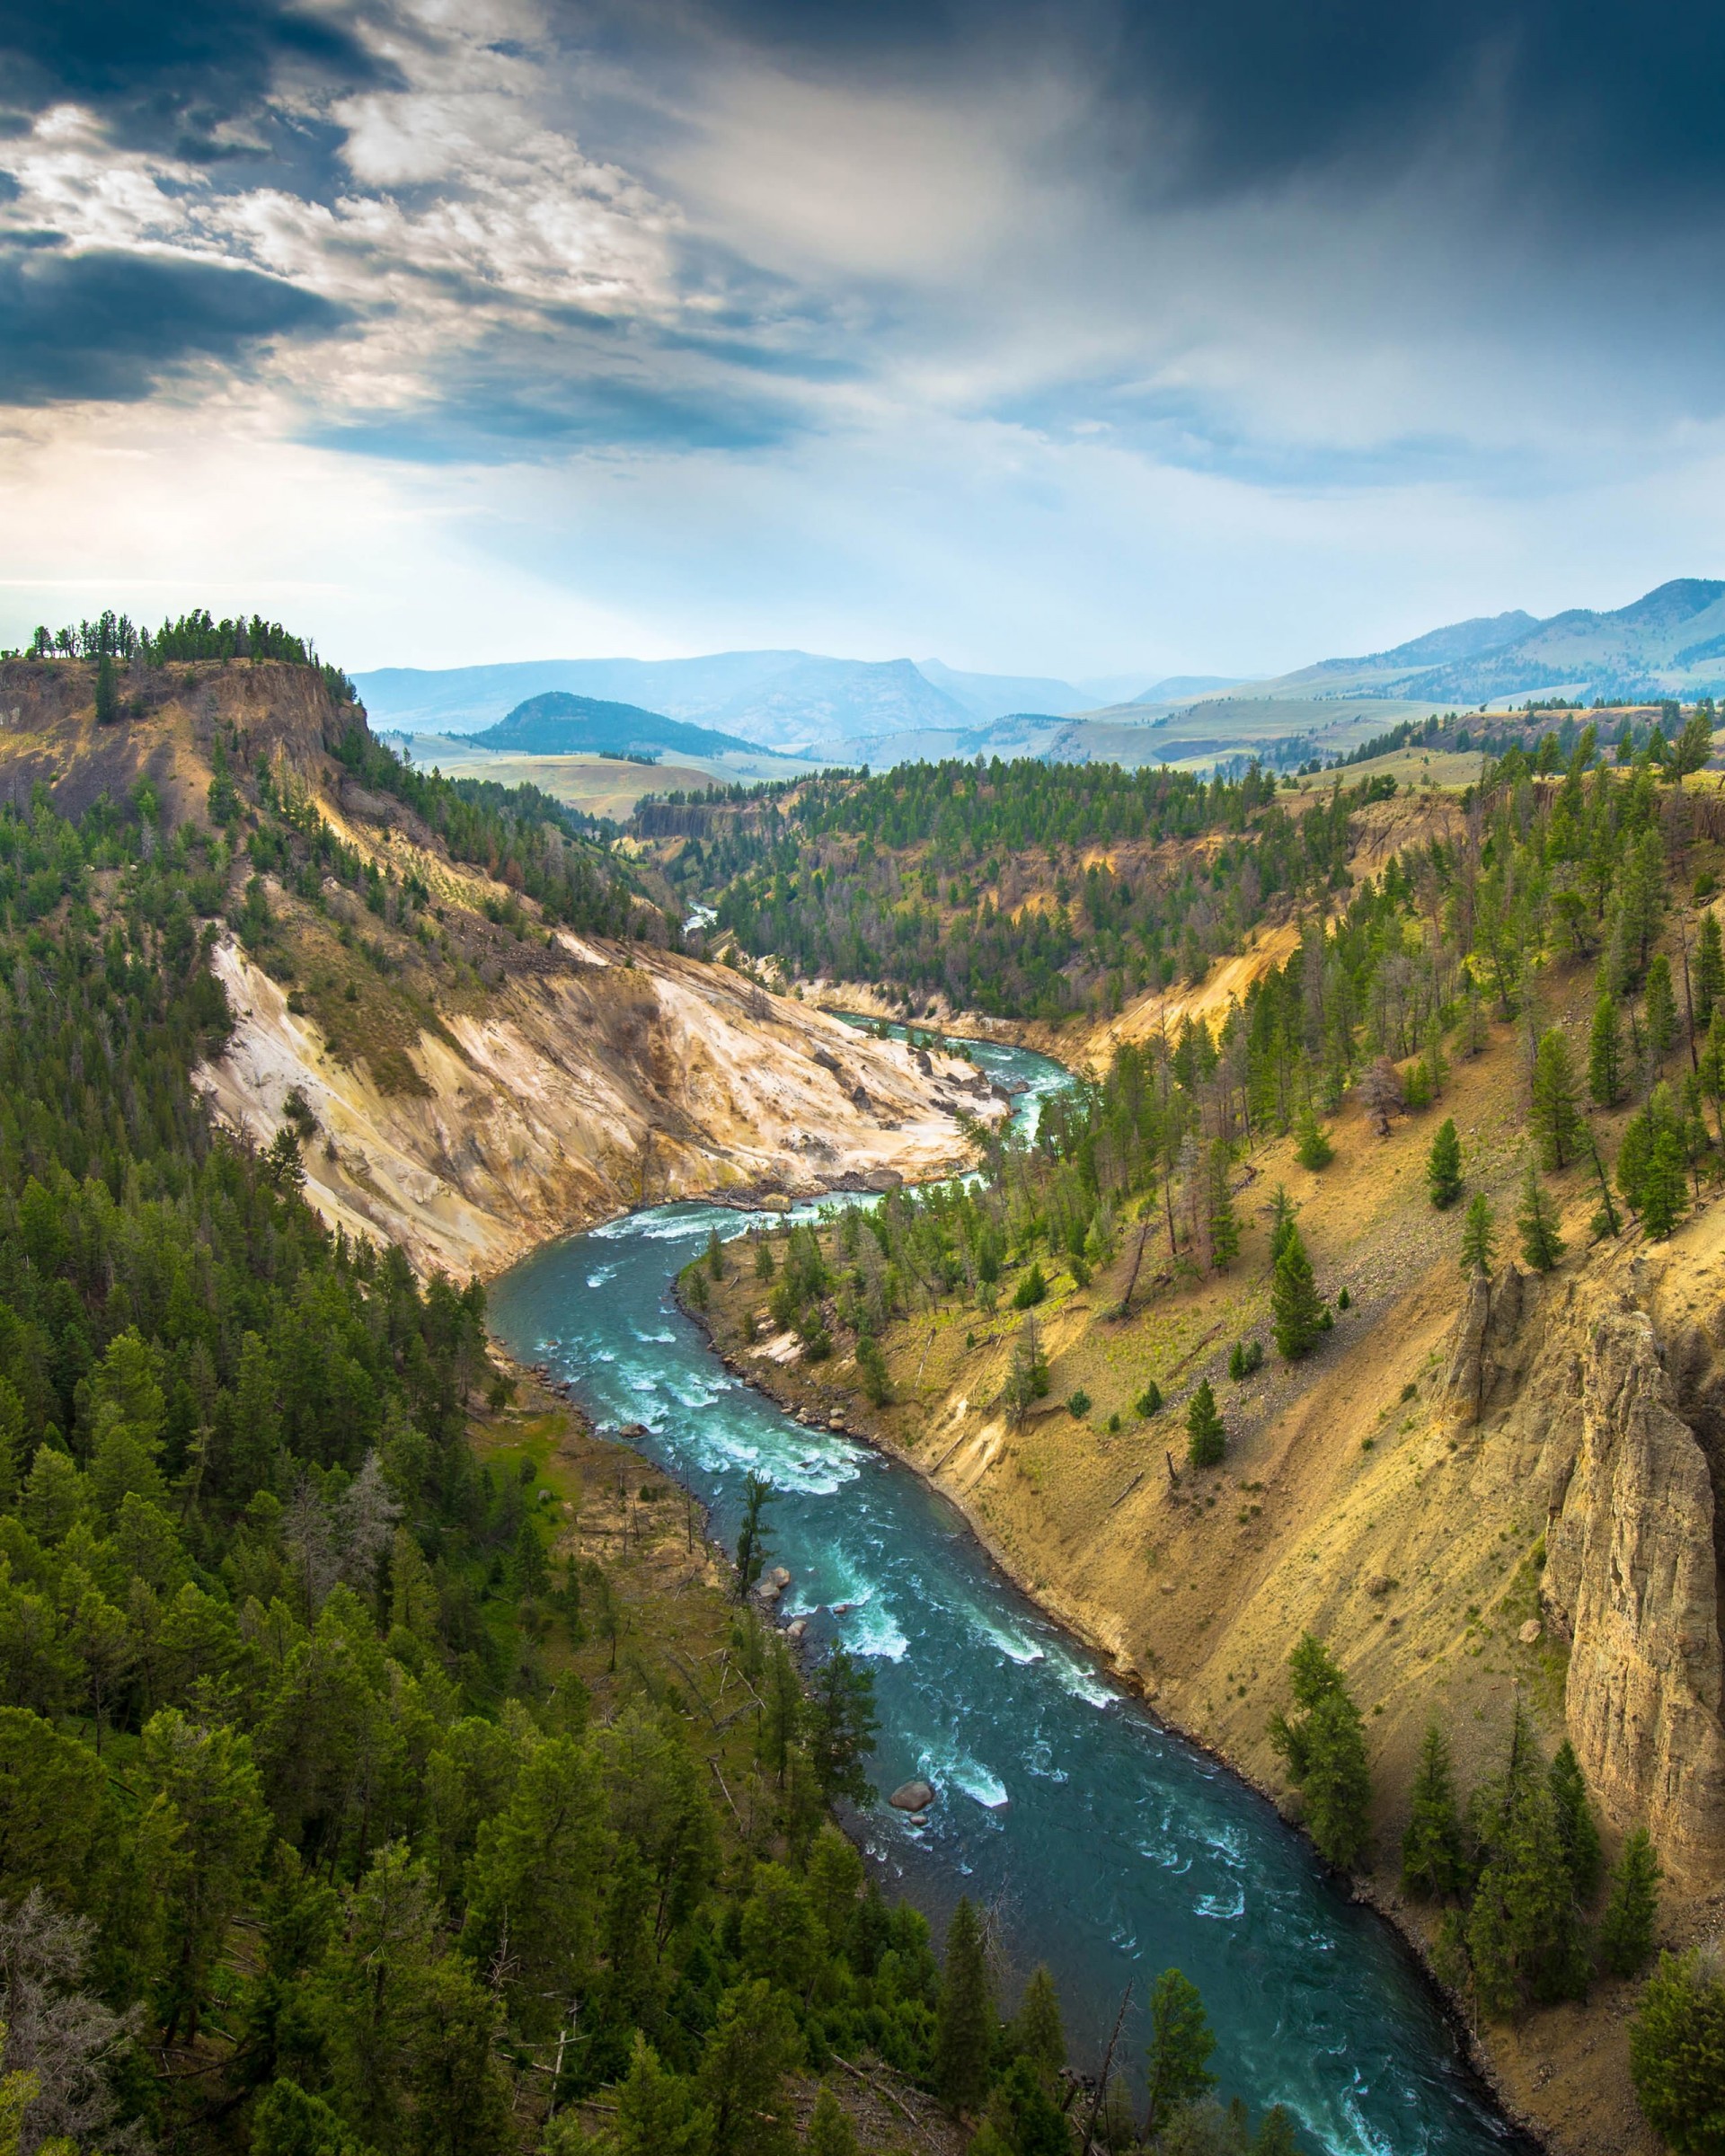 The River, Grand Canyon of Yellowstone National Park, USA Wallpaper for Google Nexus 7